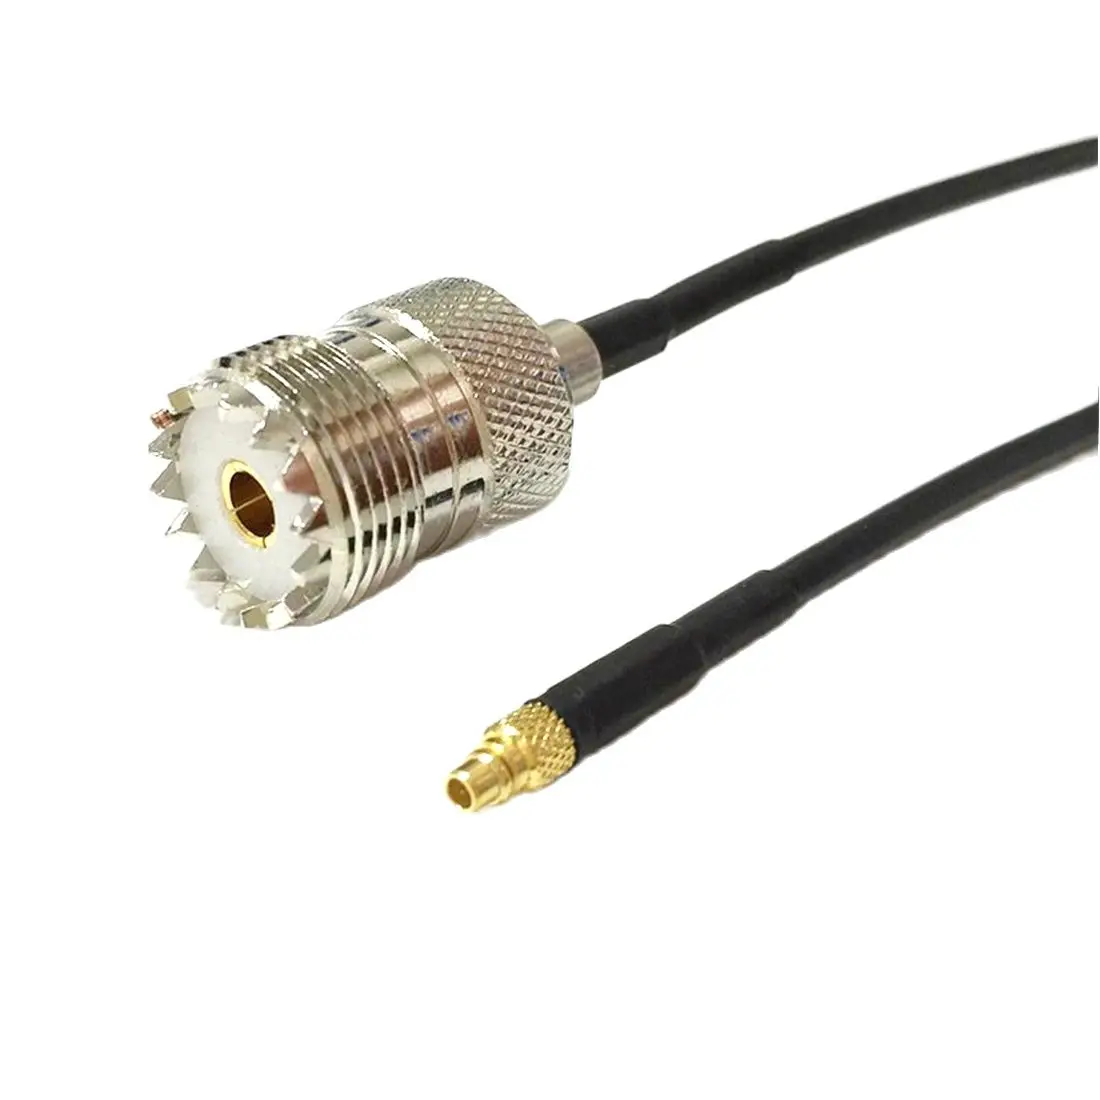 New Modem Coaxial Cable UHF Female Jack Connector Switch MMCX Male Plug Connector RG174 Cable 20CM 8inch Adapter test adapter car radio antenna bnc head rf coaxial connector jack plug for motorola gp88s gp88 gp328 ht750 kenwood tk310 icom